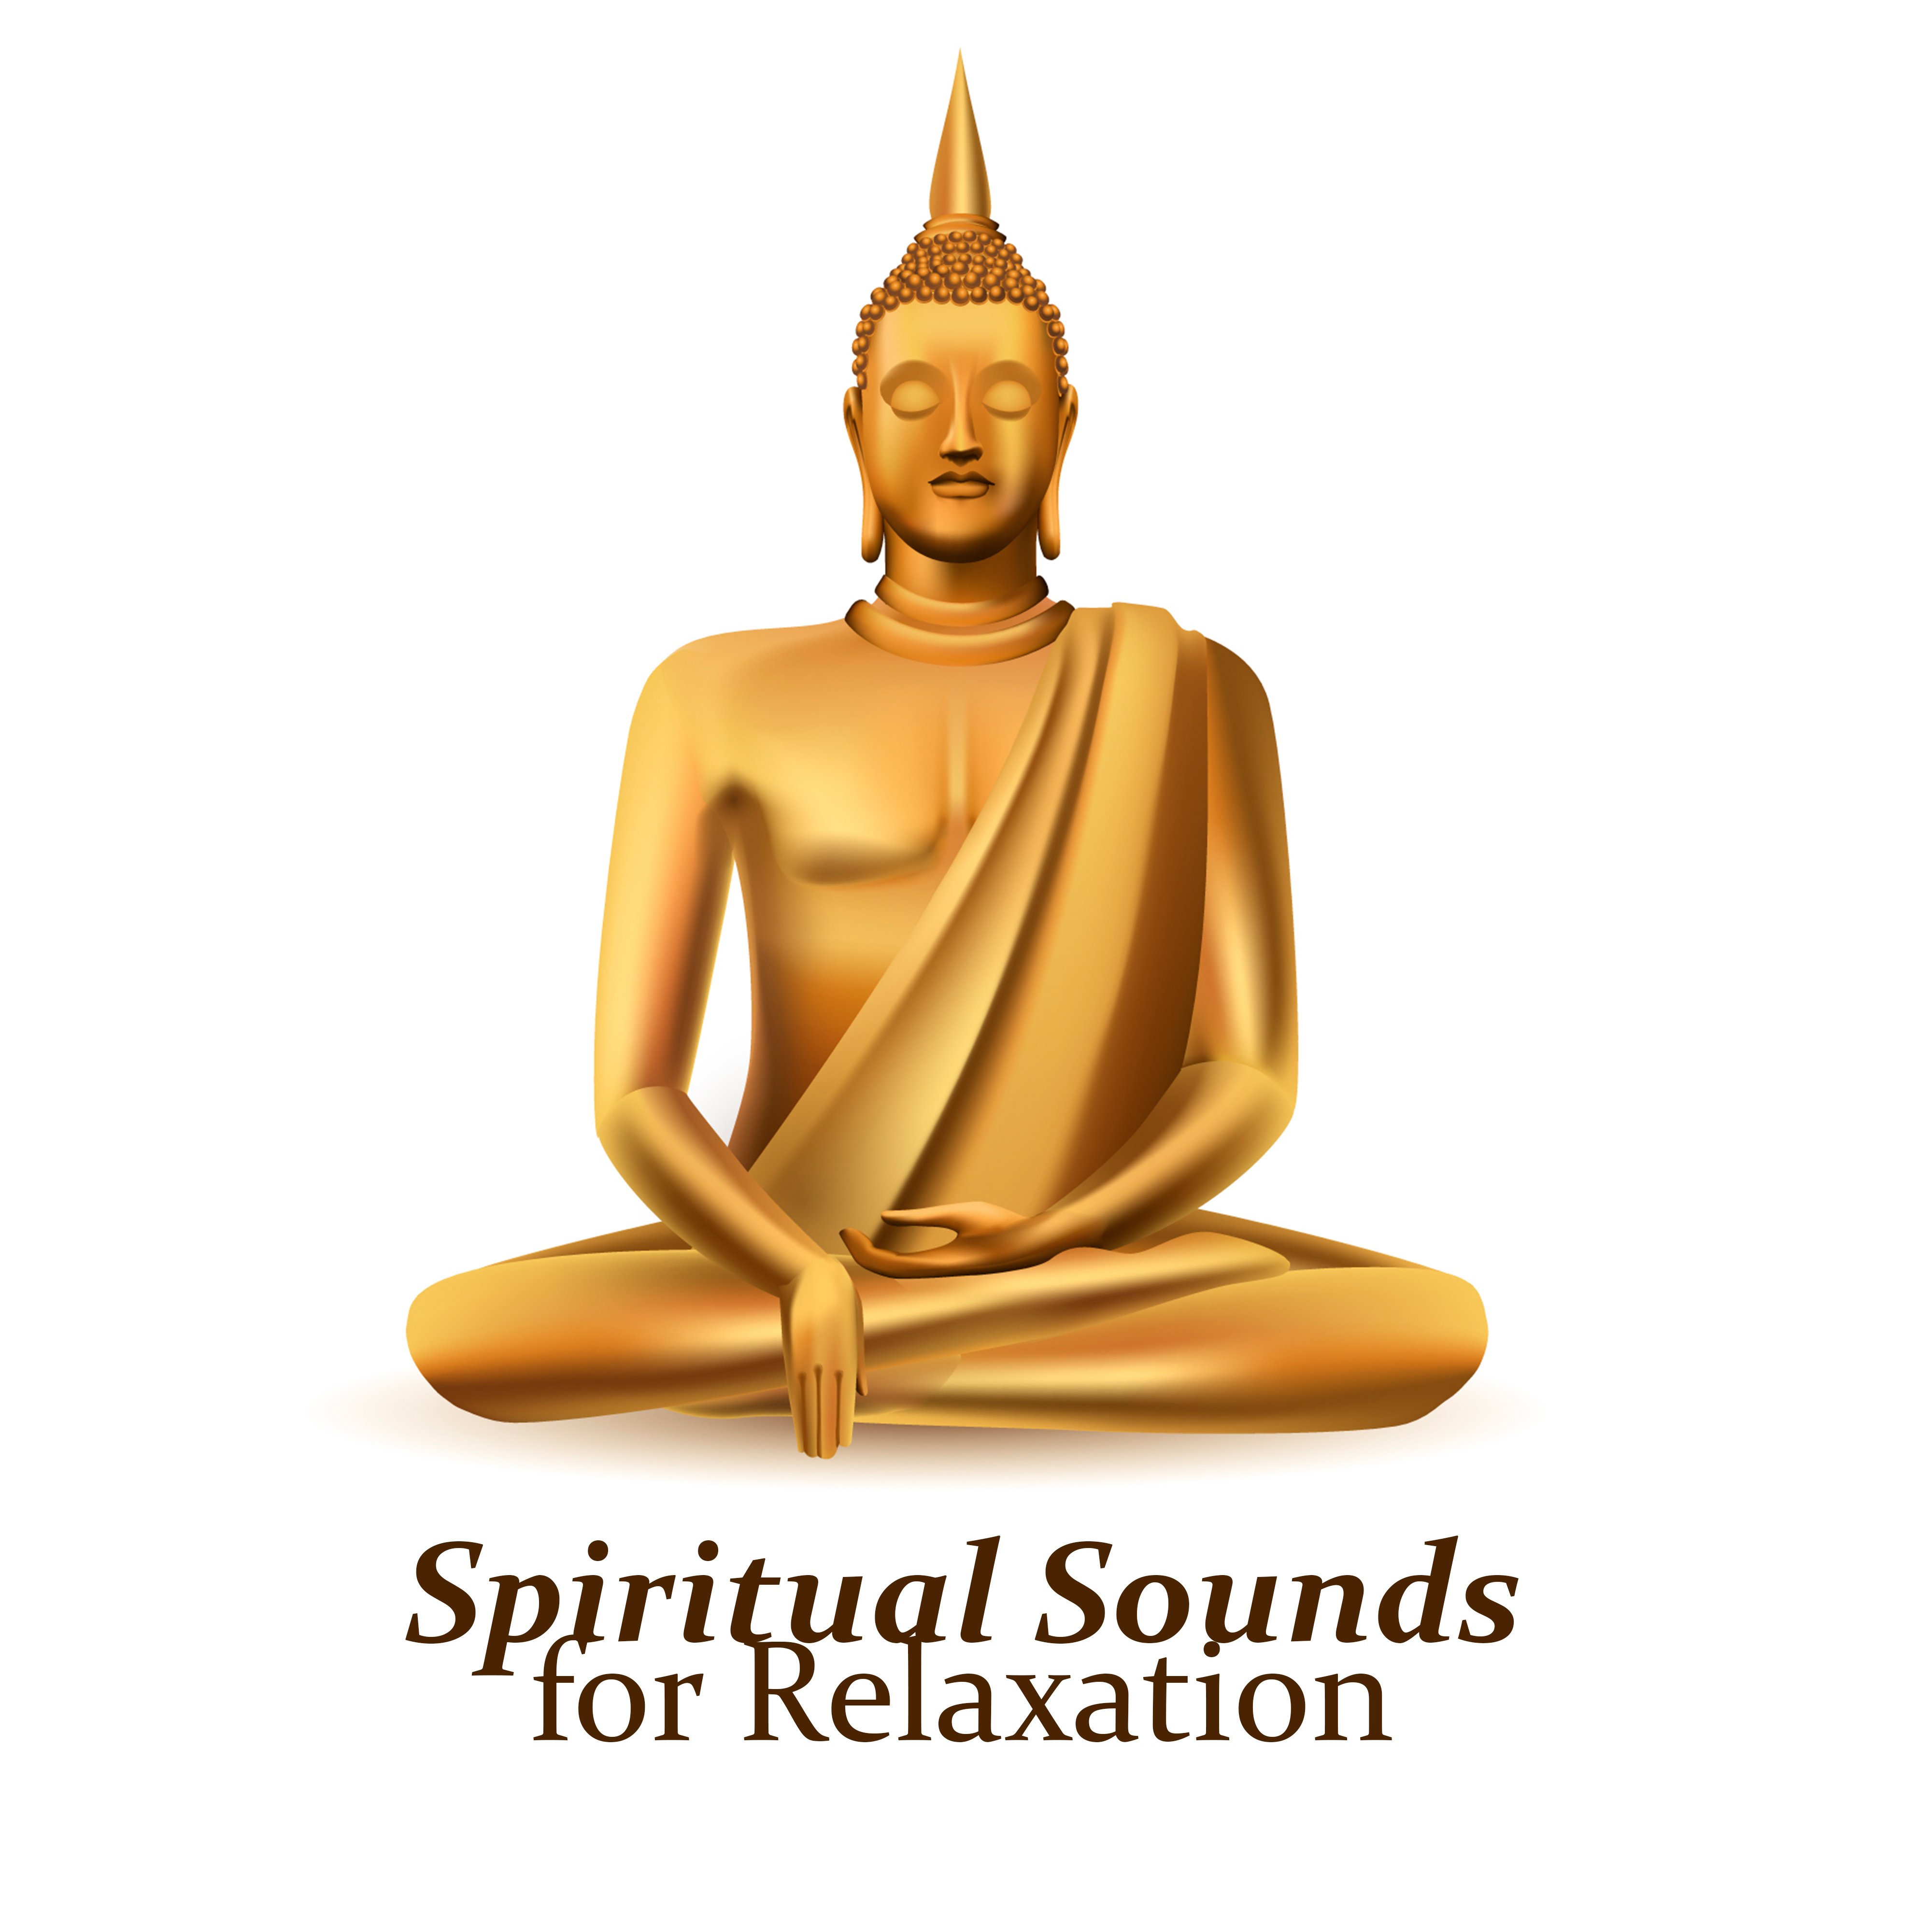 Spiritual Sounds for Relaxation